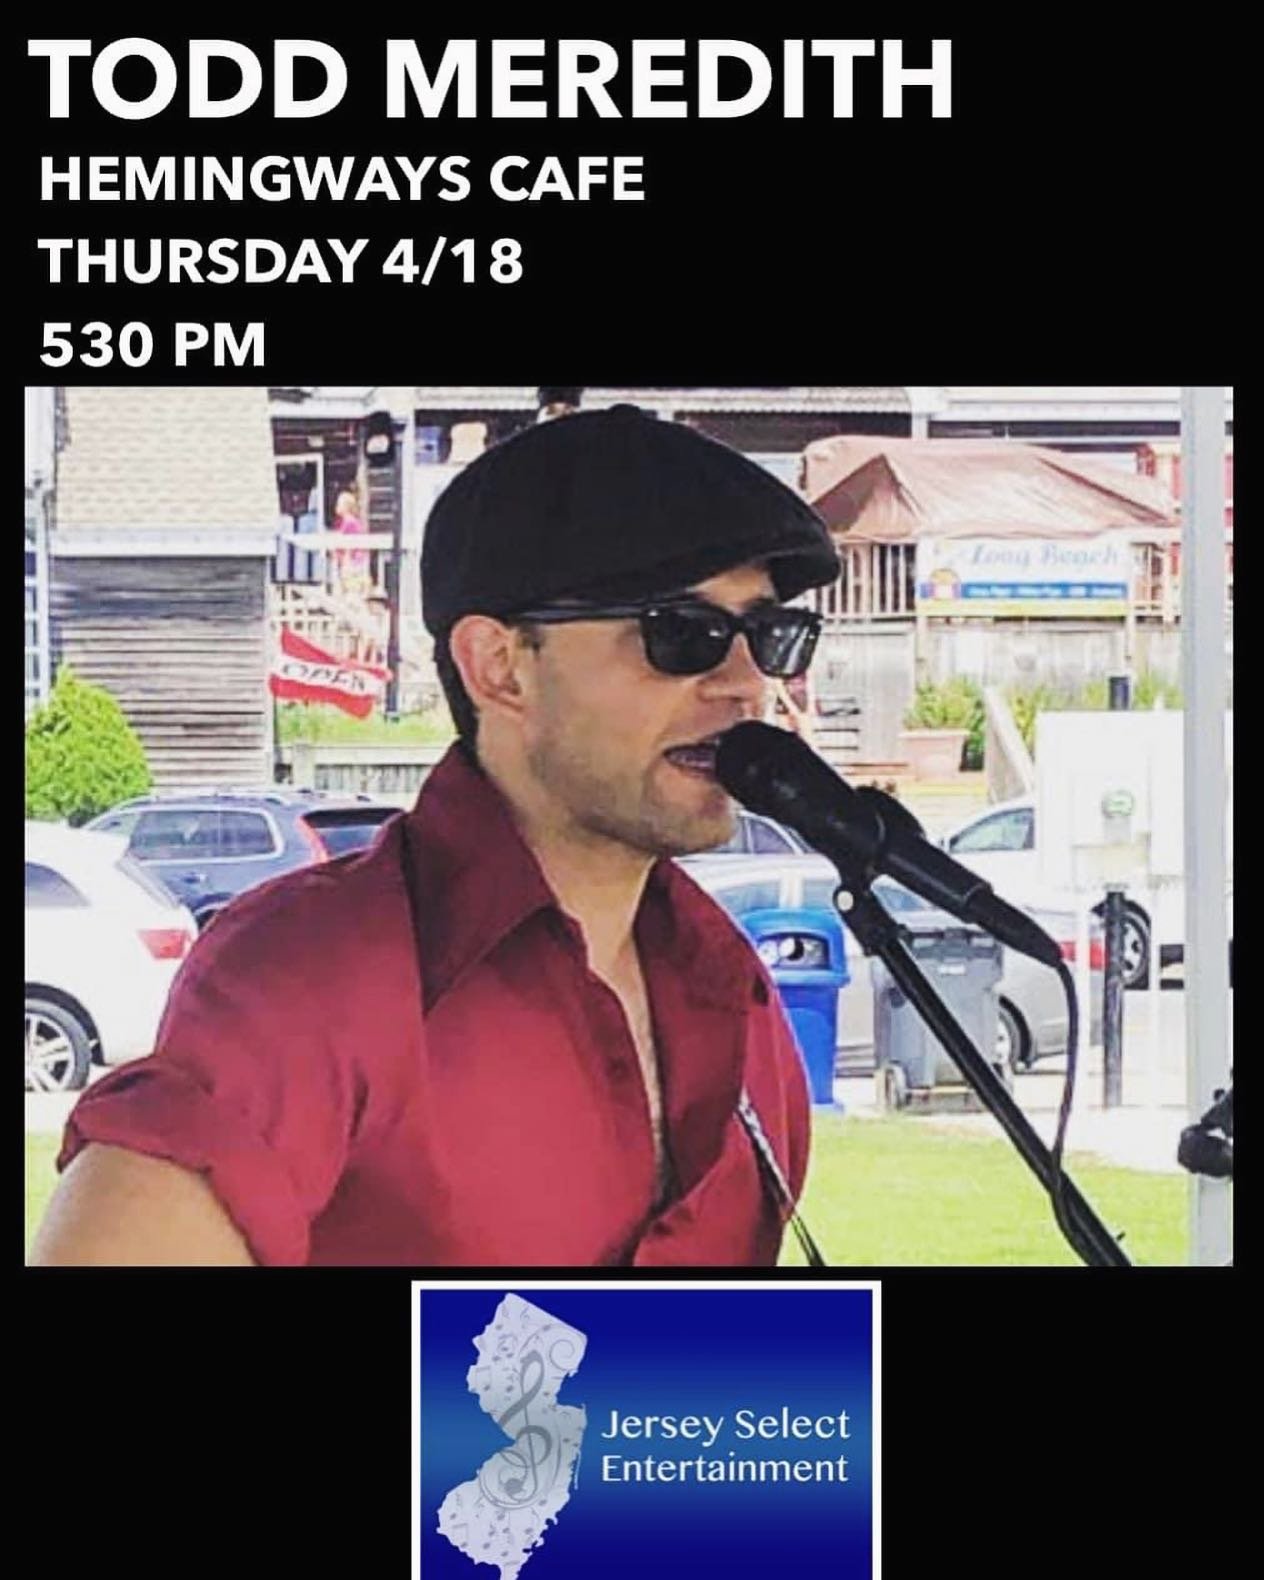 Sweet place in Seaside Heights. Good food. Lots of TVs for sports viewing. Pool tables. And music tonight by me starting at 5:30pm! @jerseyselect @hemingways_seaside #livemusic #seasideheights